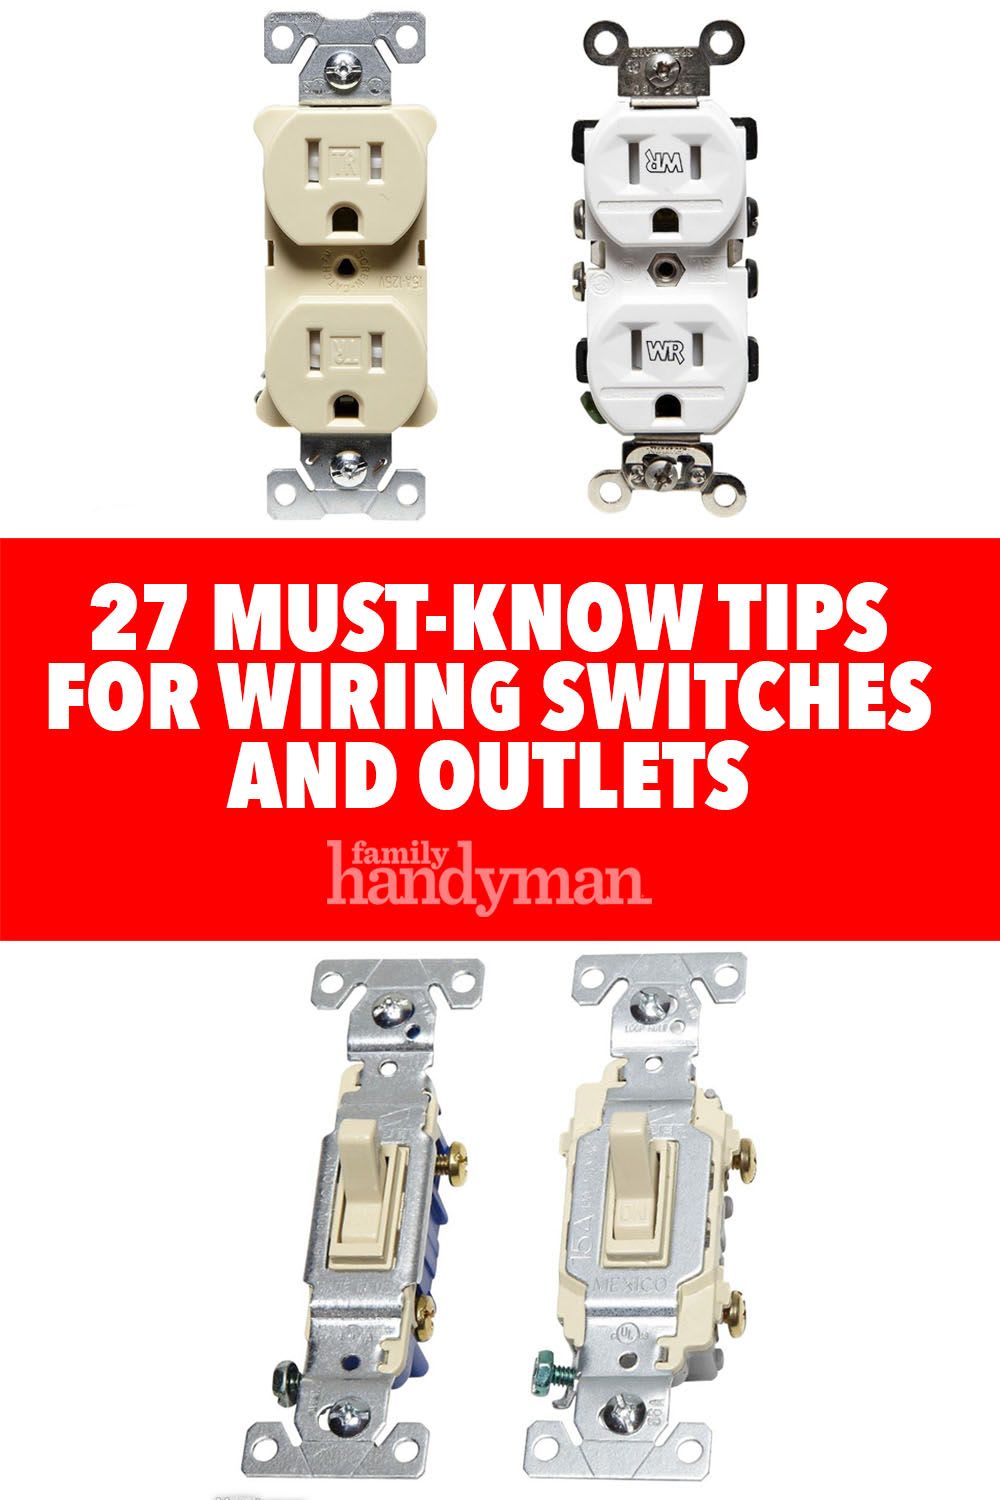 27 Top Tips for Wiring Switches and Outlets Yourself | Home electrical wiring, Wire switch, Diy electrical